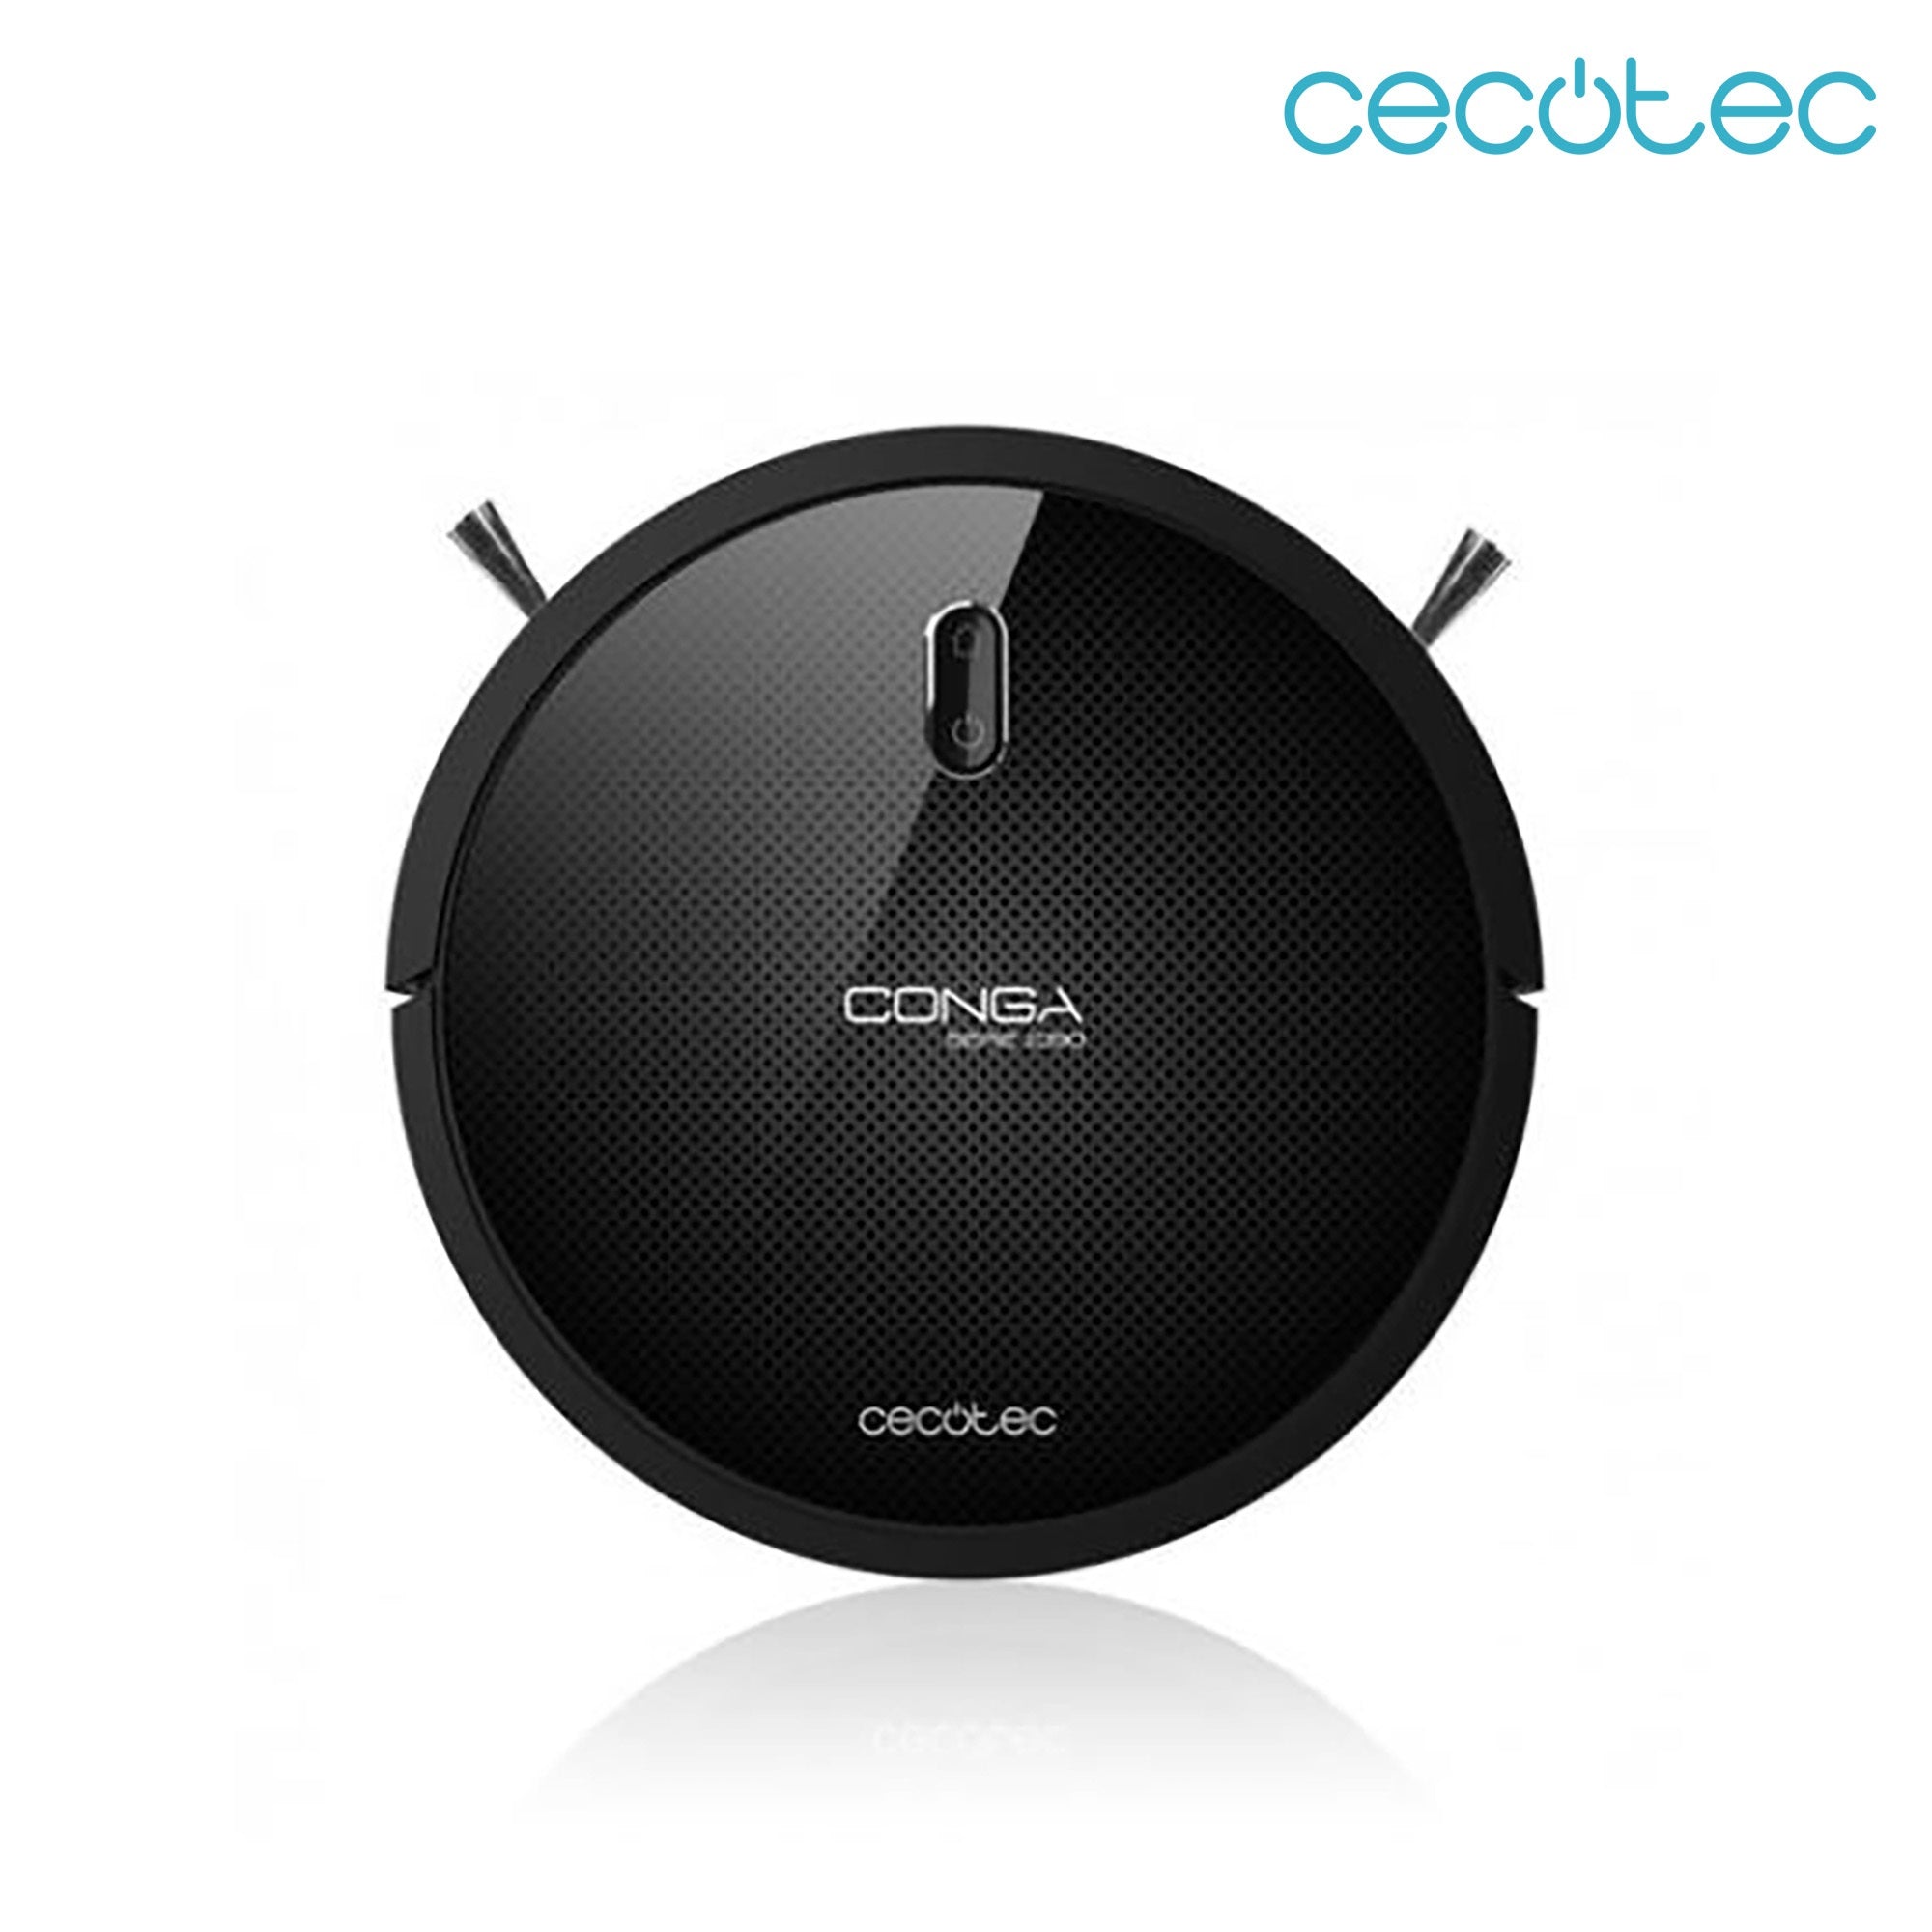 Cecotec Conga 1090 Connected Force Robot vacuum cleaner - AliExpress